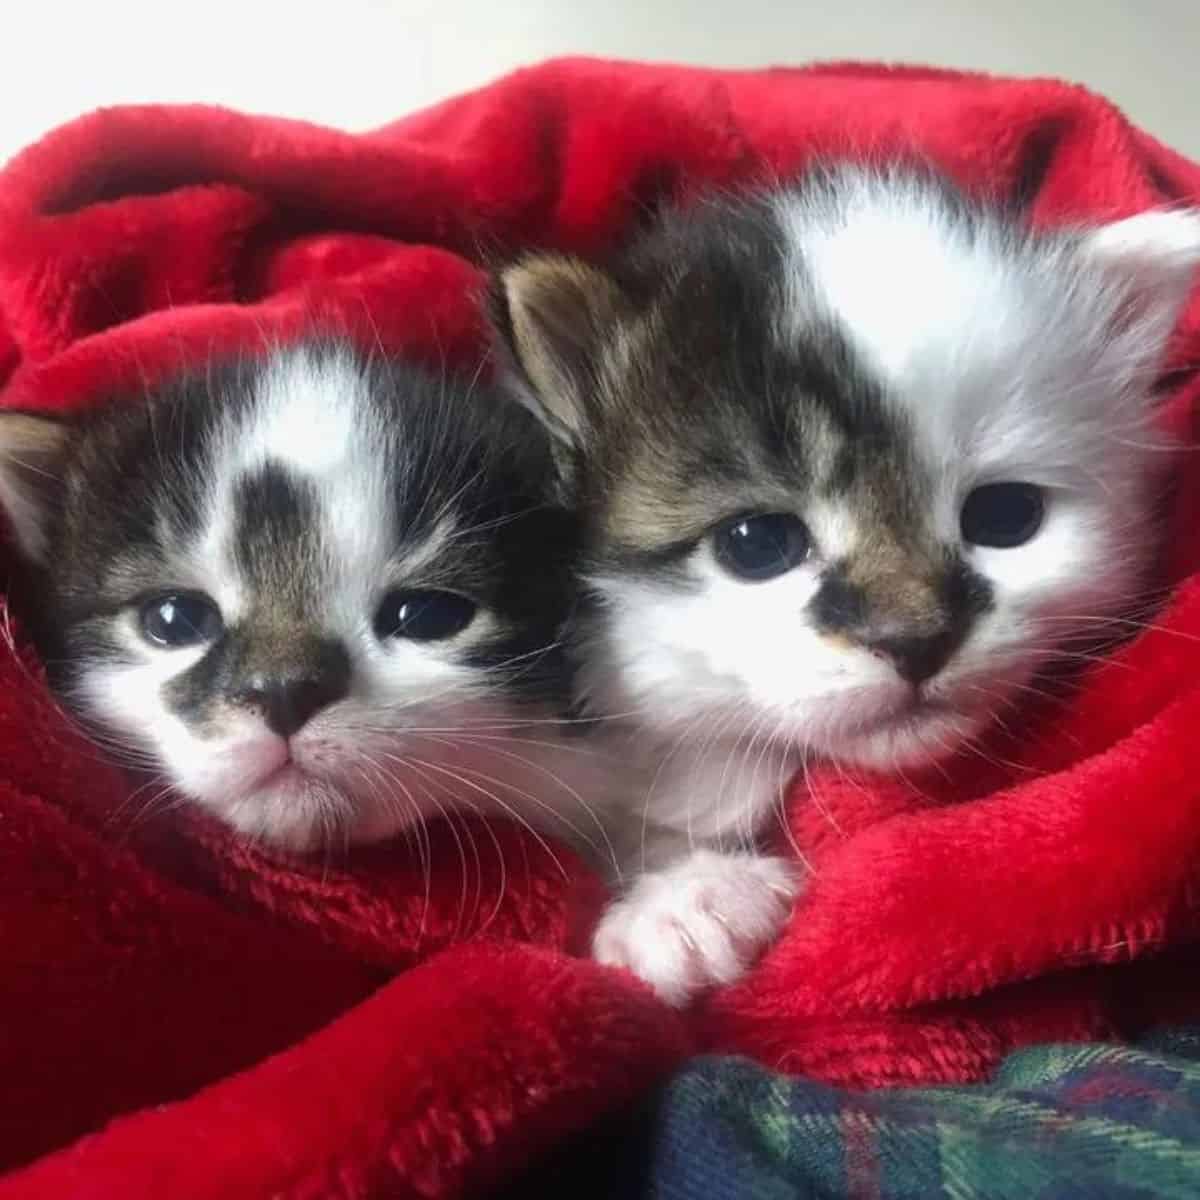 cute kittens wrapped in a red blanket